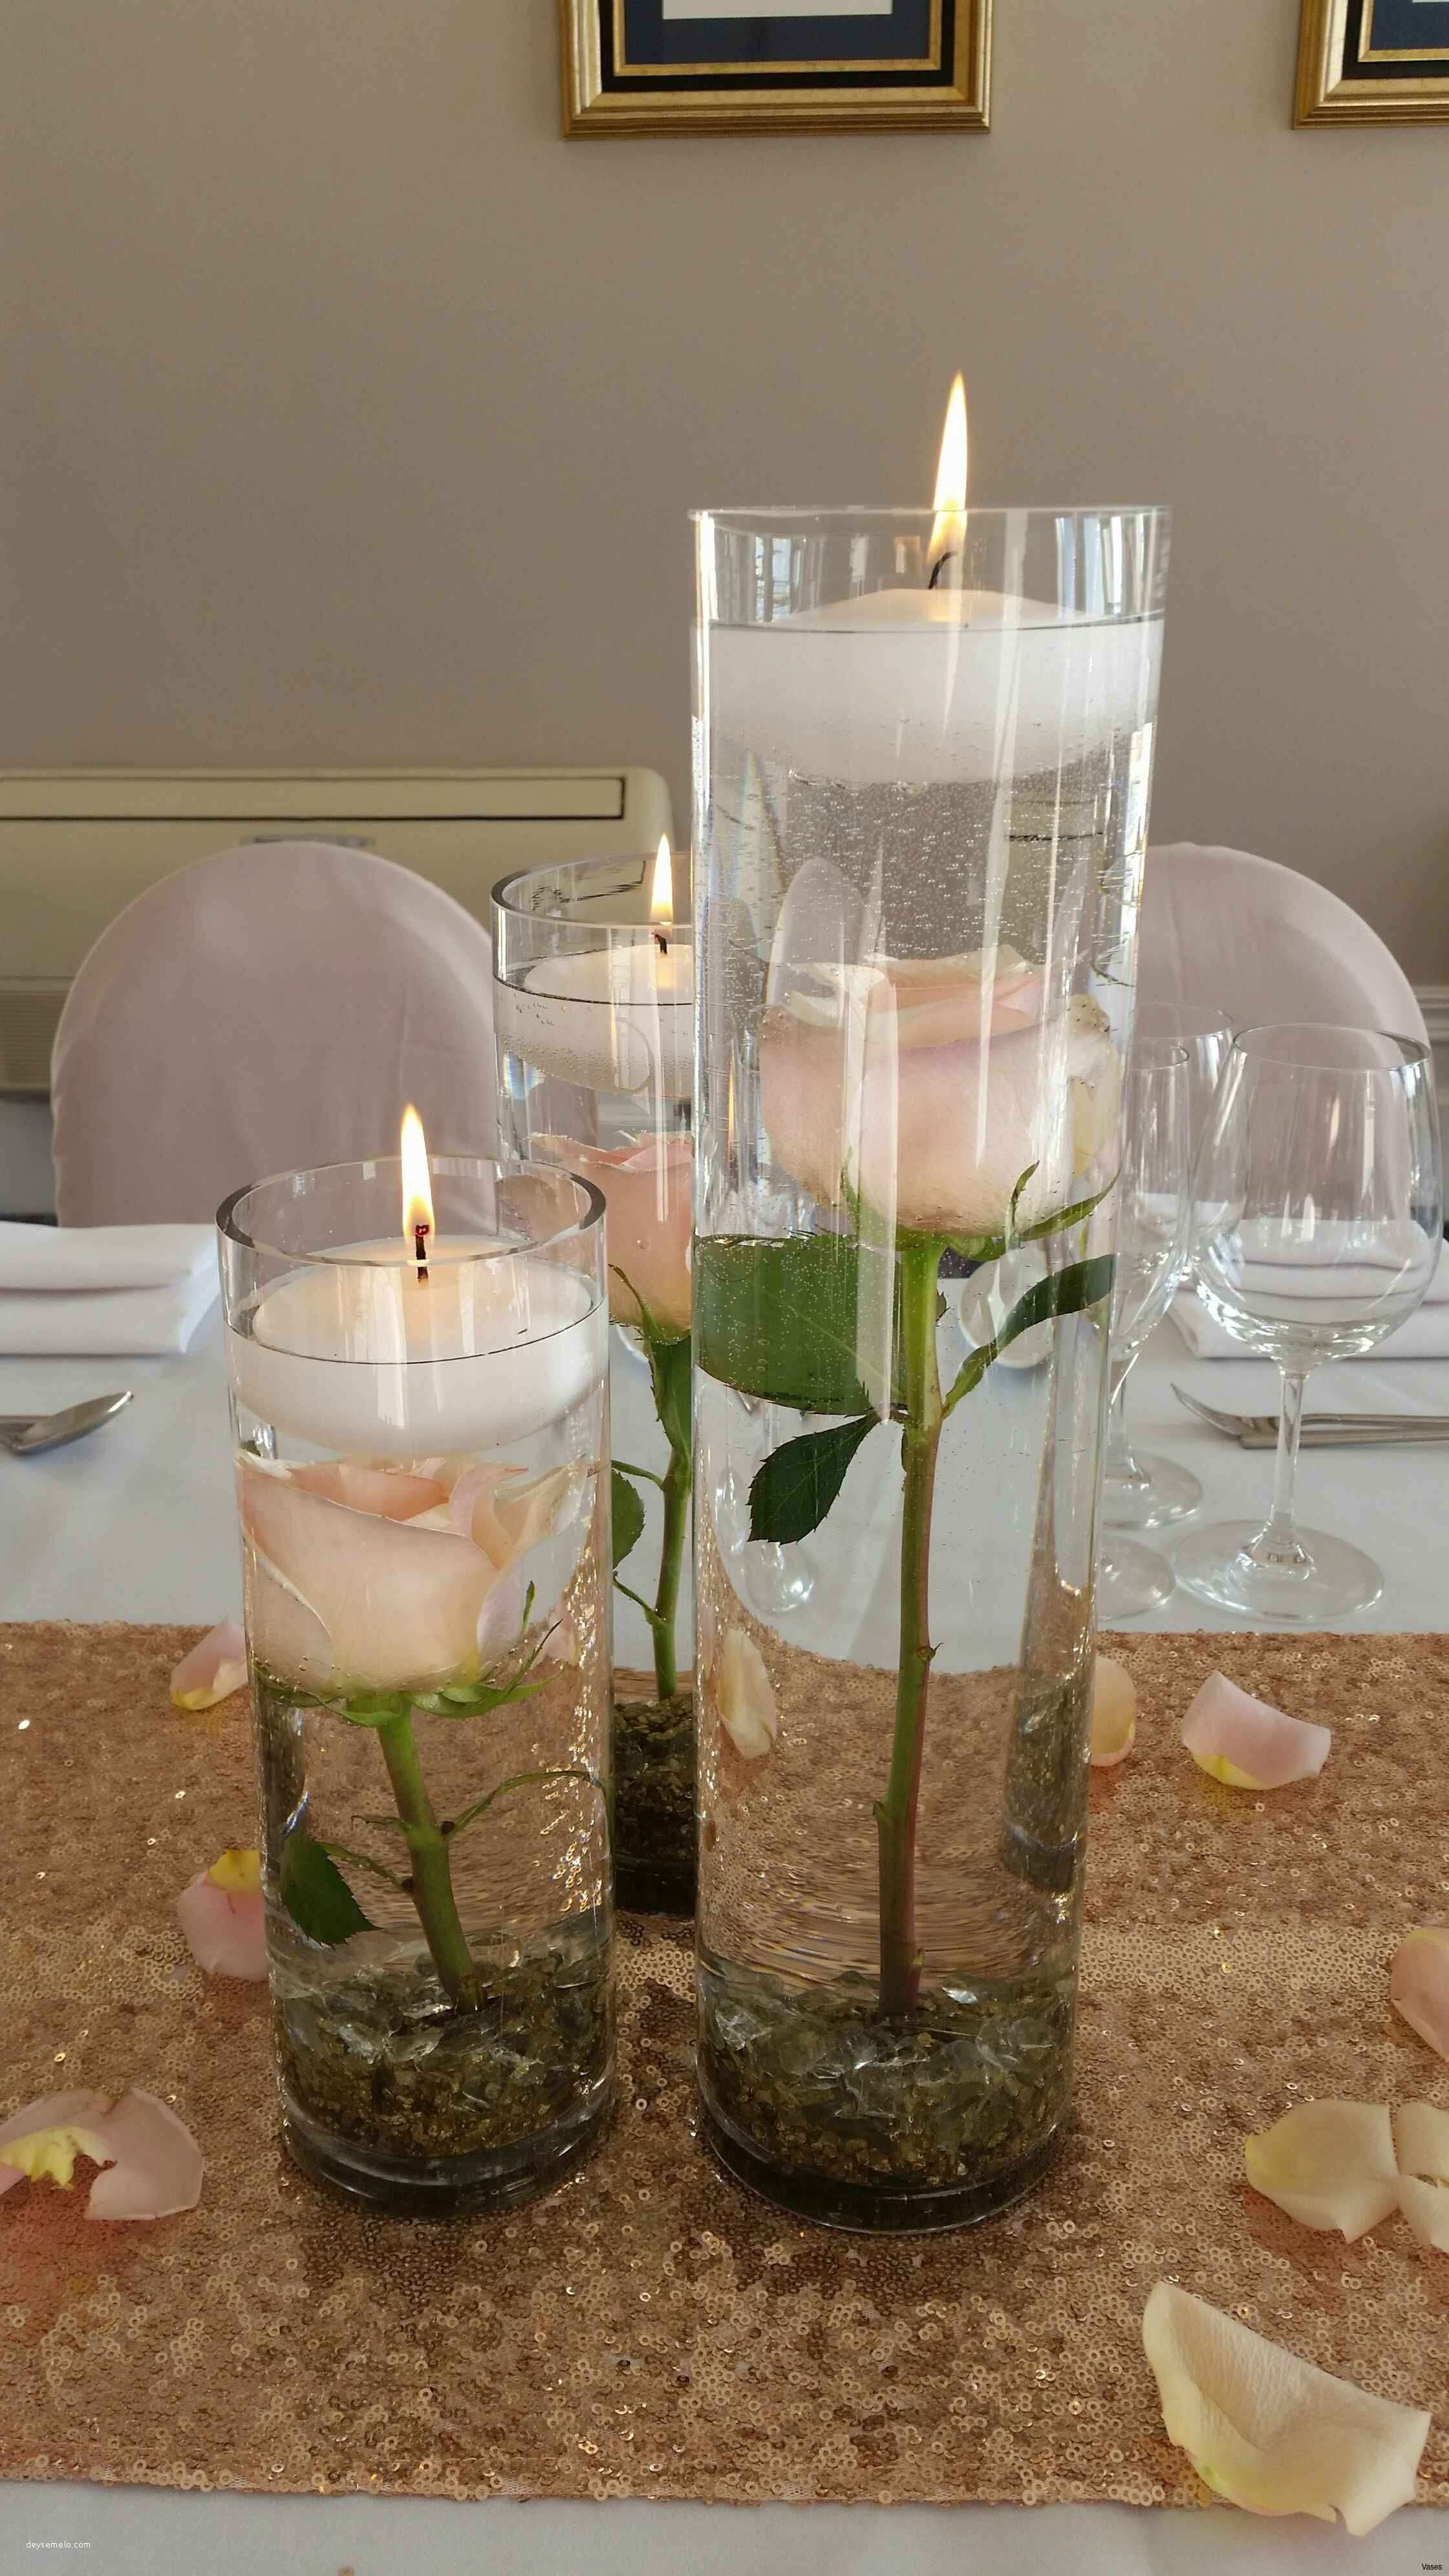 15 Famous High Vases Centerpieces 2024 free download high vases centerpieces of 2018 candle holders centerpieces wedding inspiration tips 2018 in modern candle holders centerpieces and tall vase centerpiece ideas vases floating flowers in cent